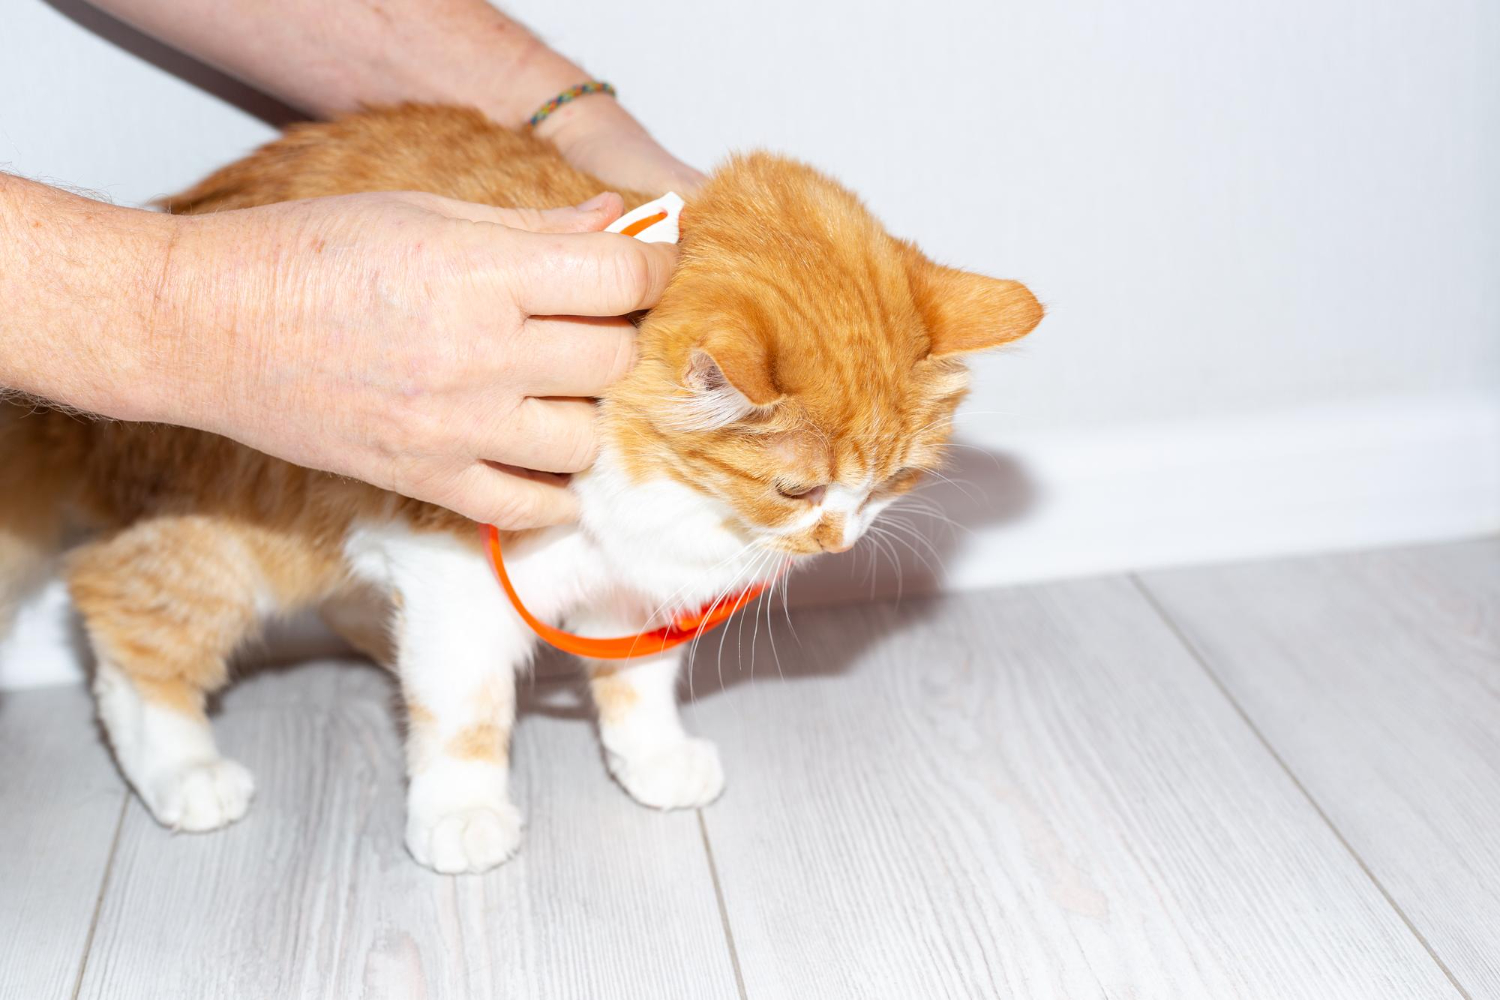 A flea collar is put on the young cat by a vet